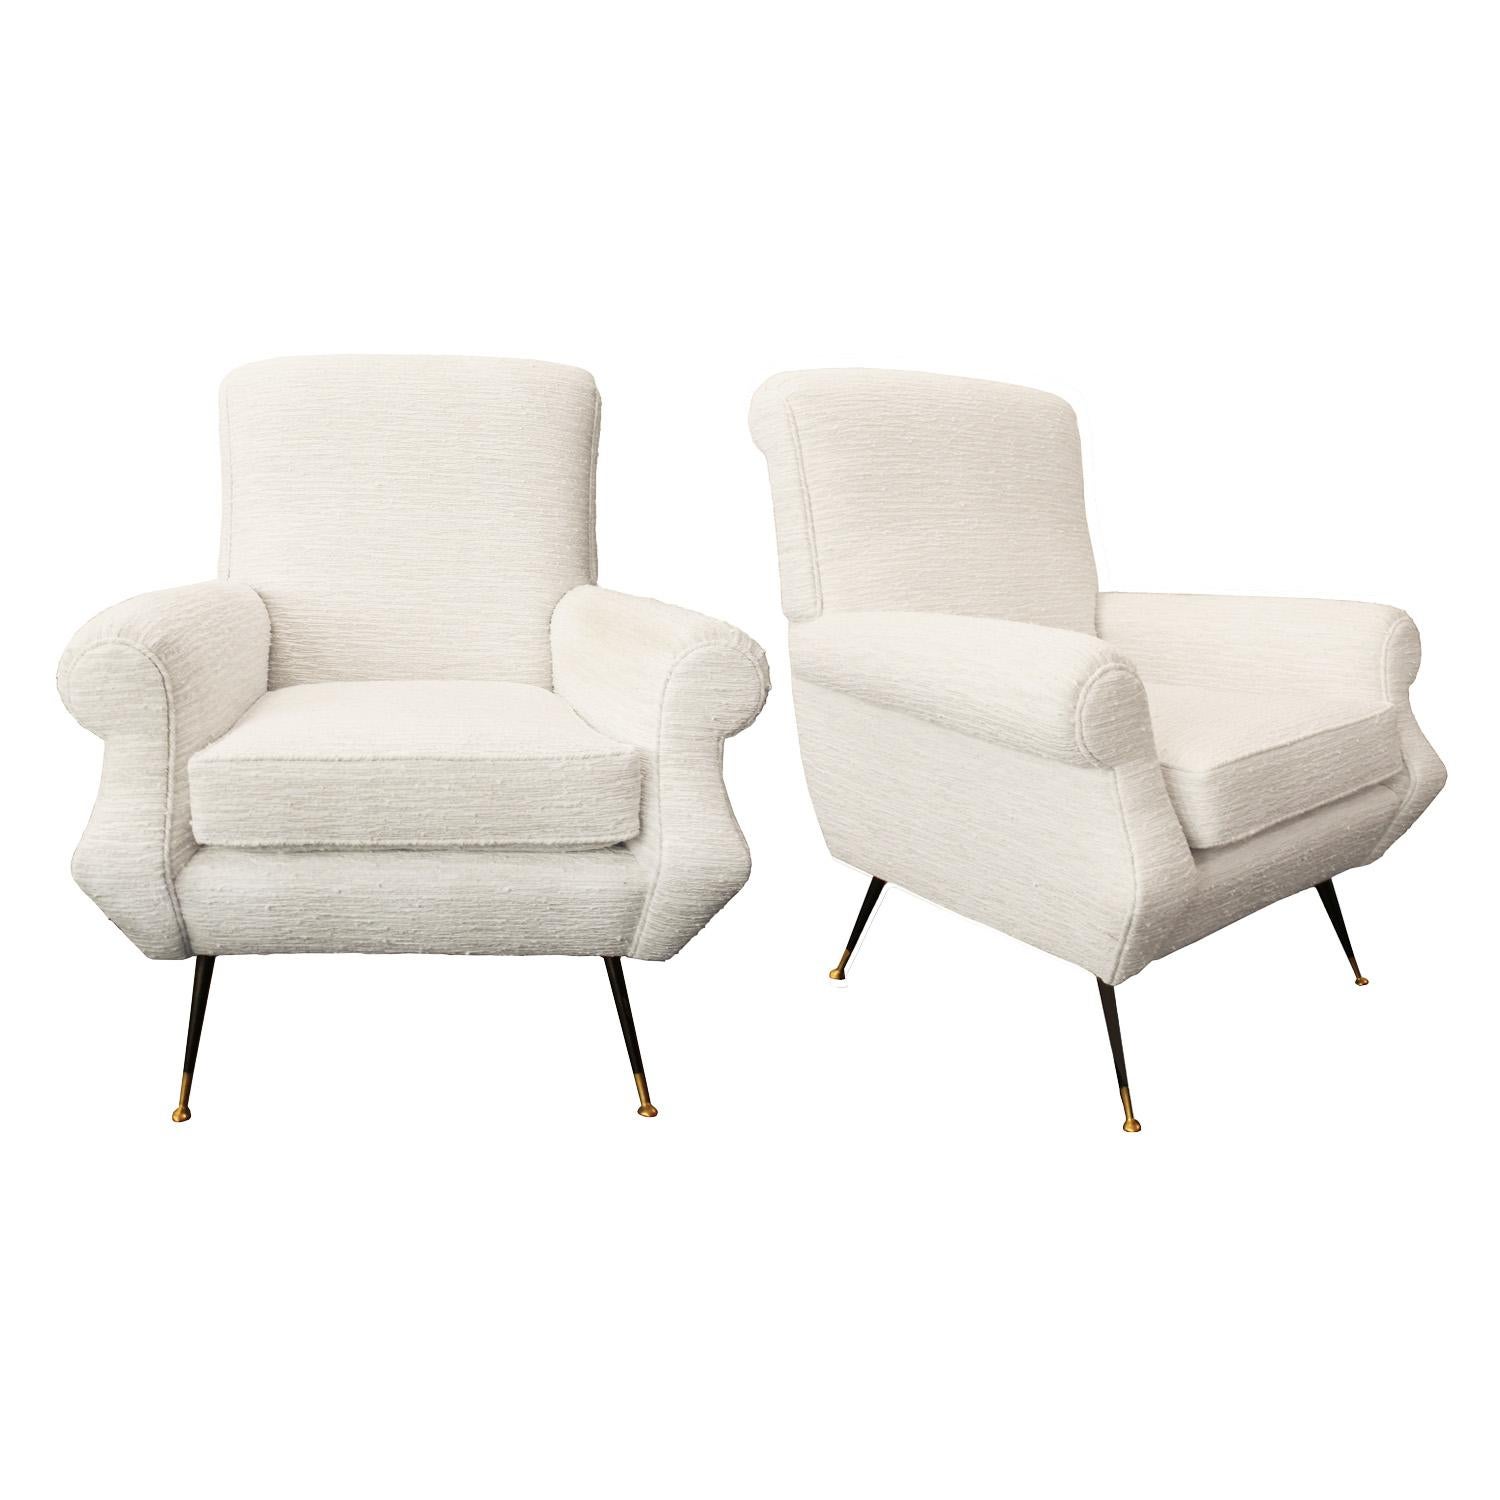 Stylish pair of Mid-Century Modern lounge chairs with steel and brass legs. Italy 1950s

Newly upholstered by Venfield in white textured fabric.